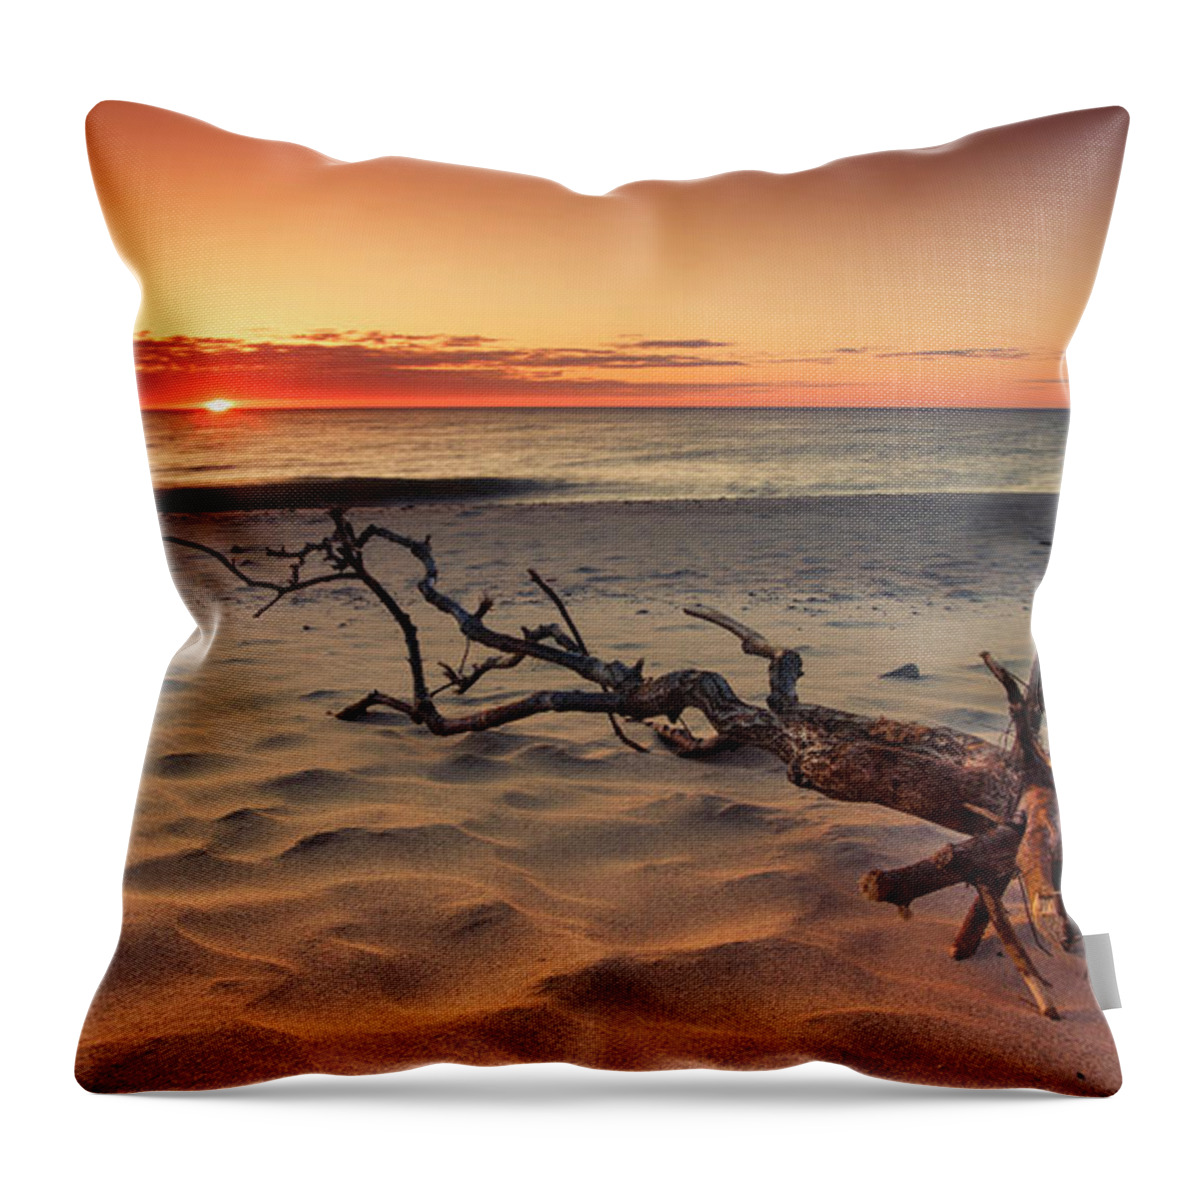 Unbelievable Throw Pillow featuring the photograph Driftwood And Unbelievable Ocean Sunrise At Nauset Beach by Darius Aniunas